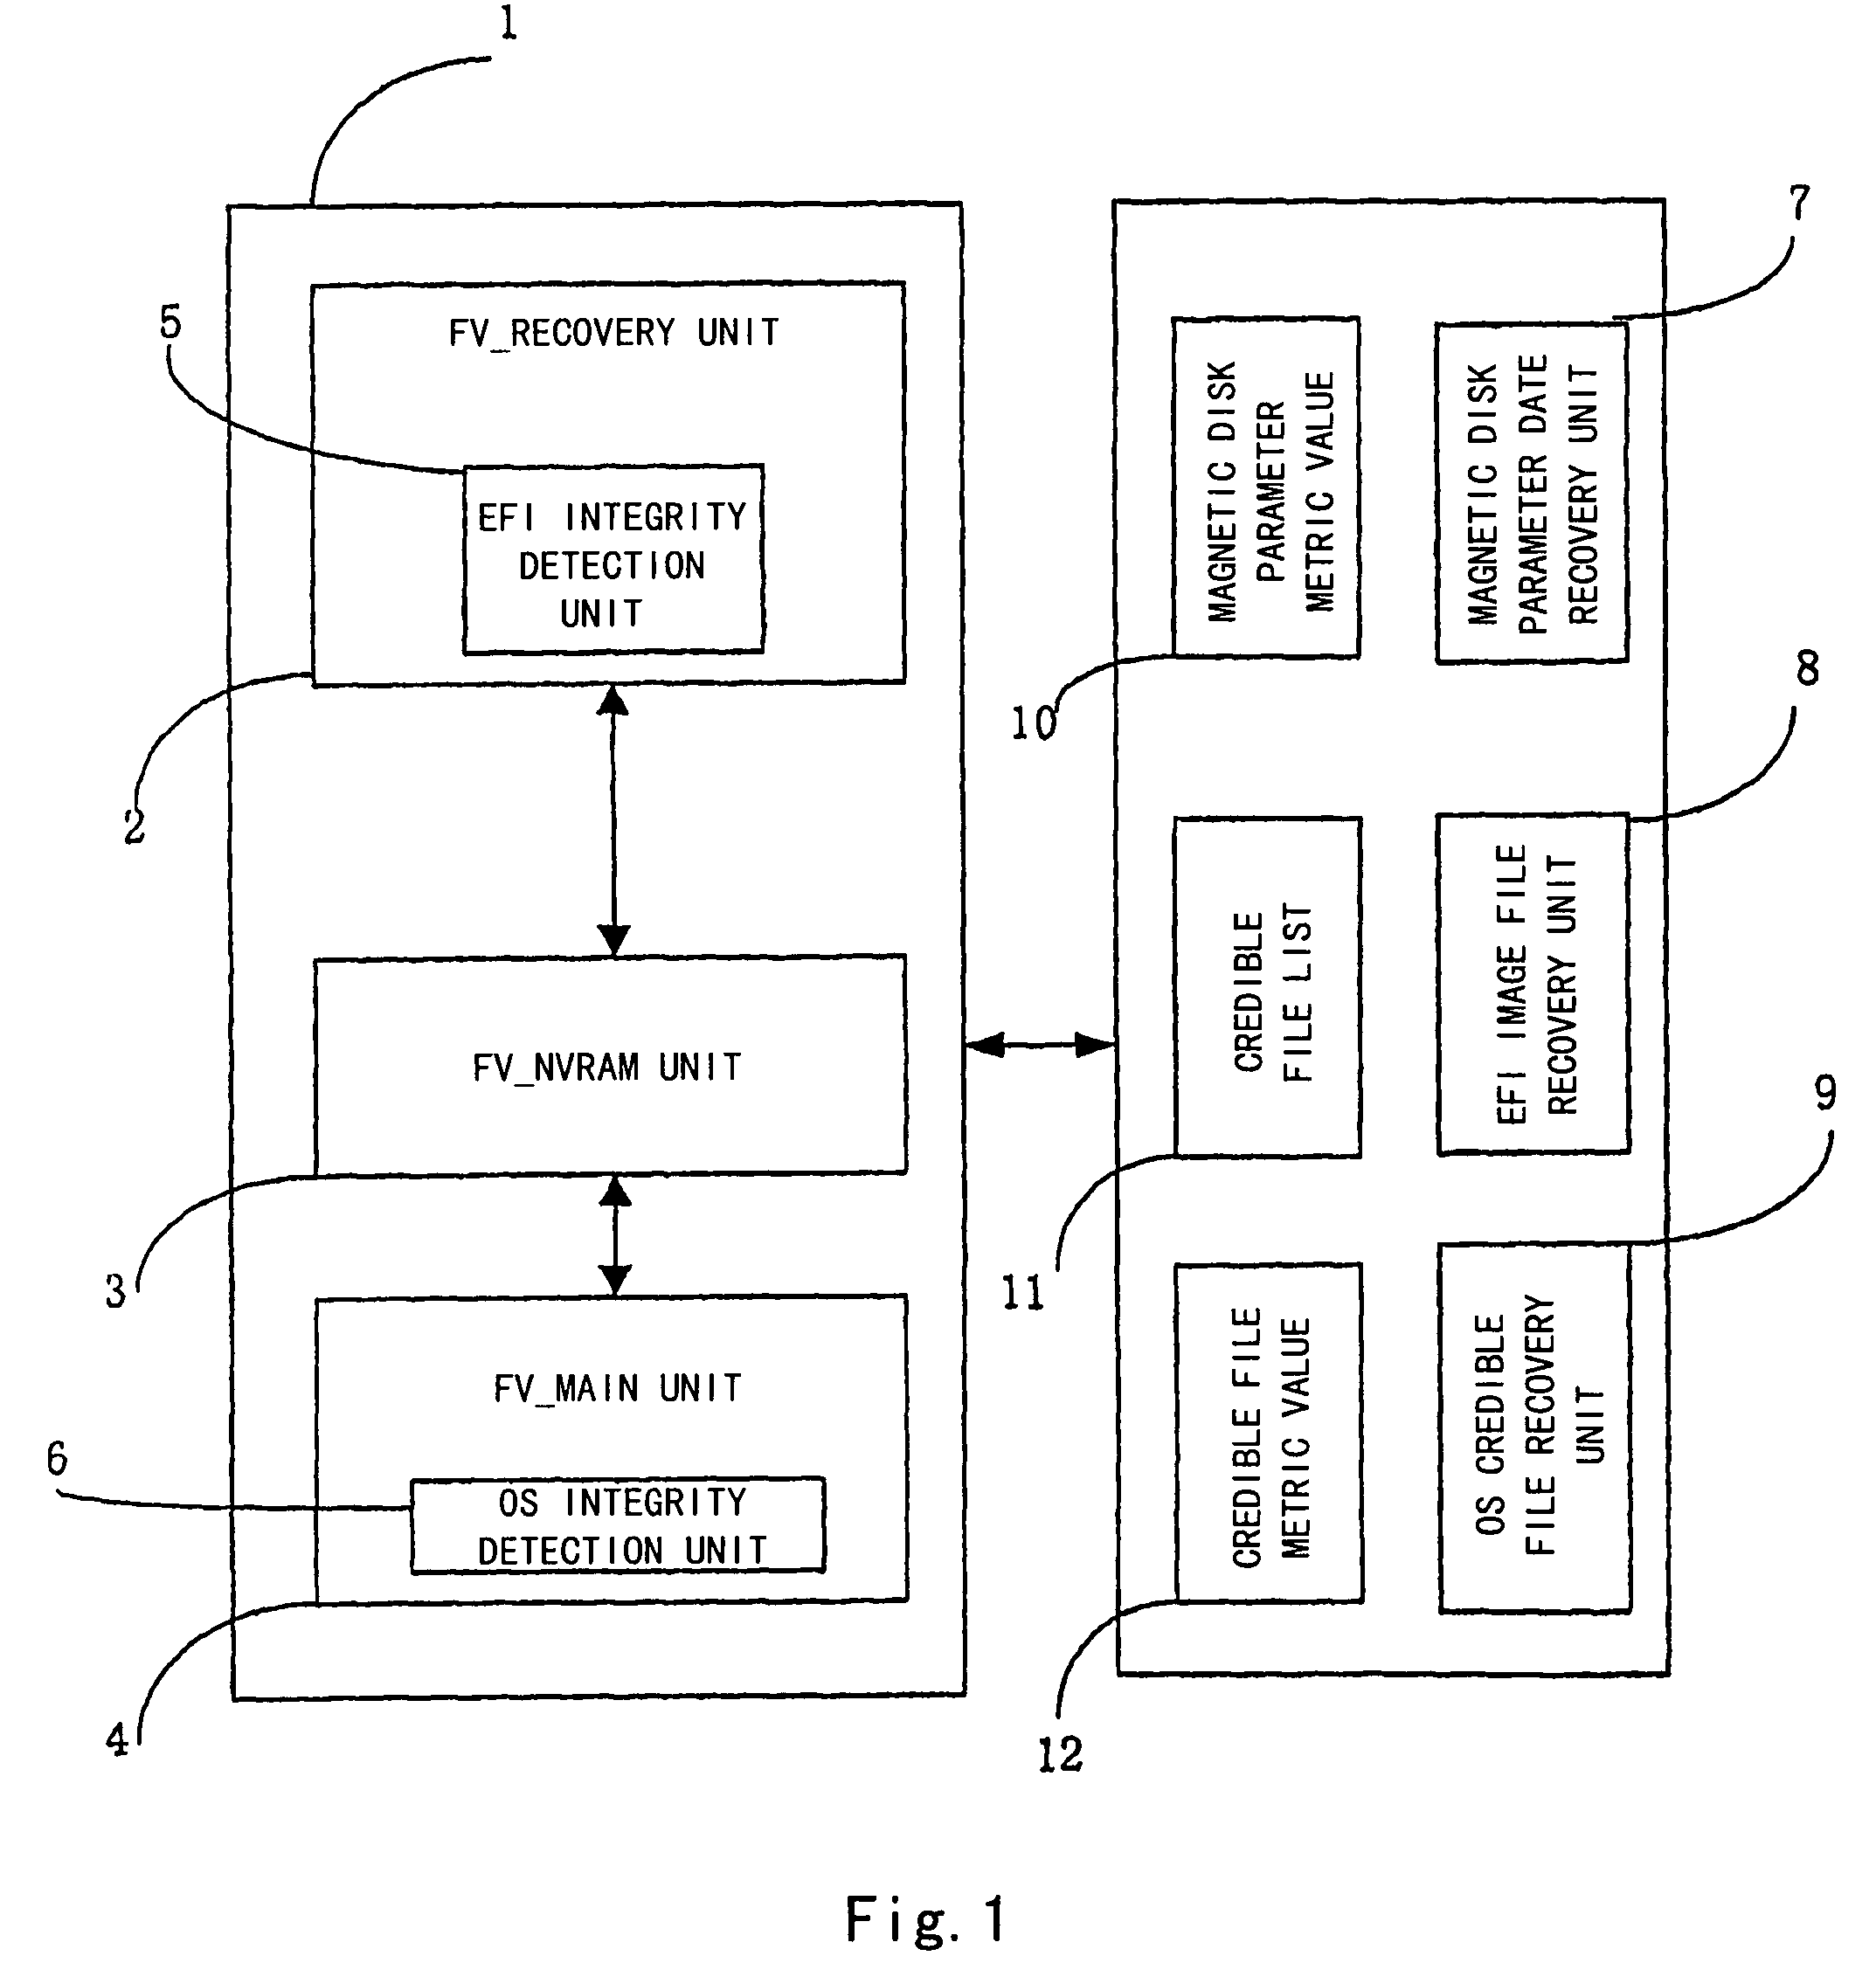 Computer system and method for performing integrity detection on the same